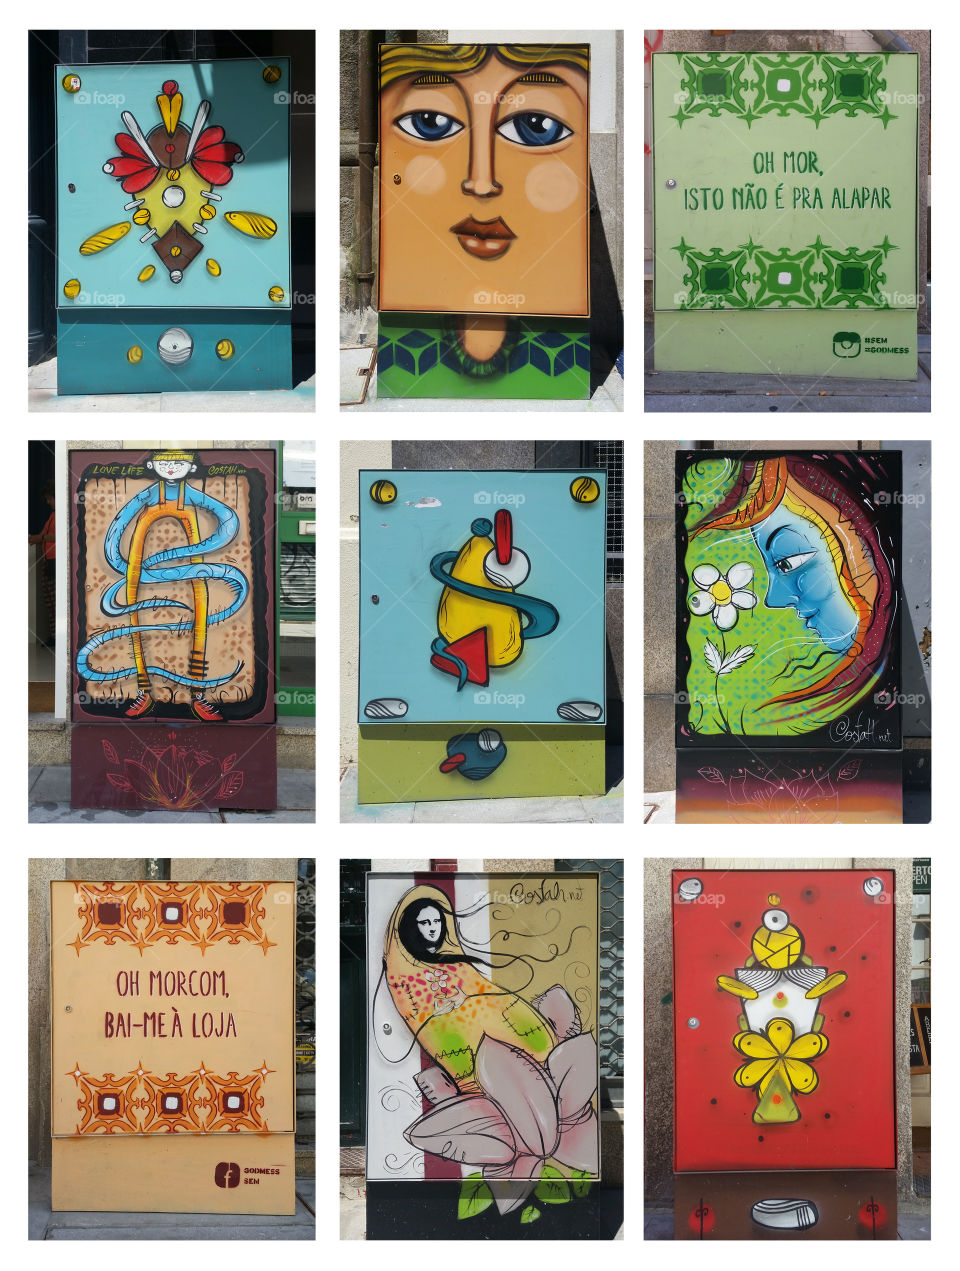 These electricity boxes in Porto were decorated beautifully. Here you see a collection.